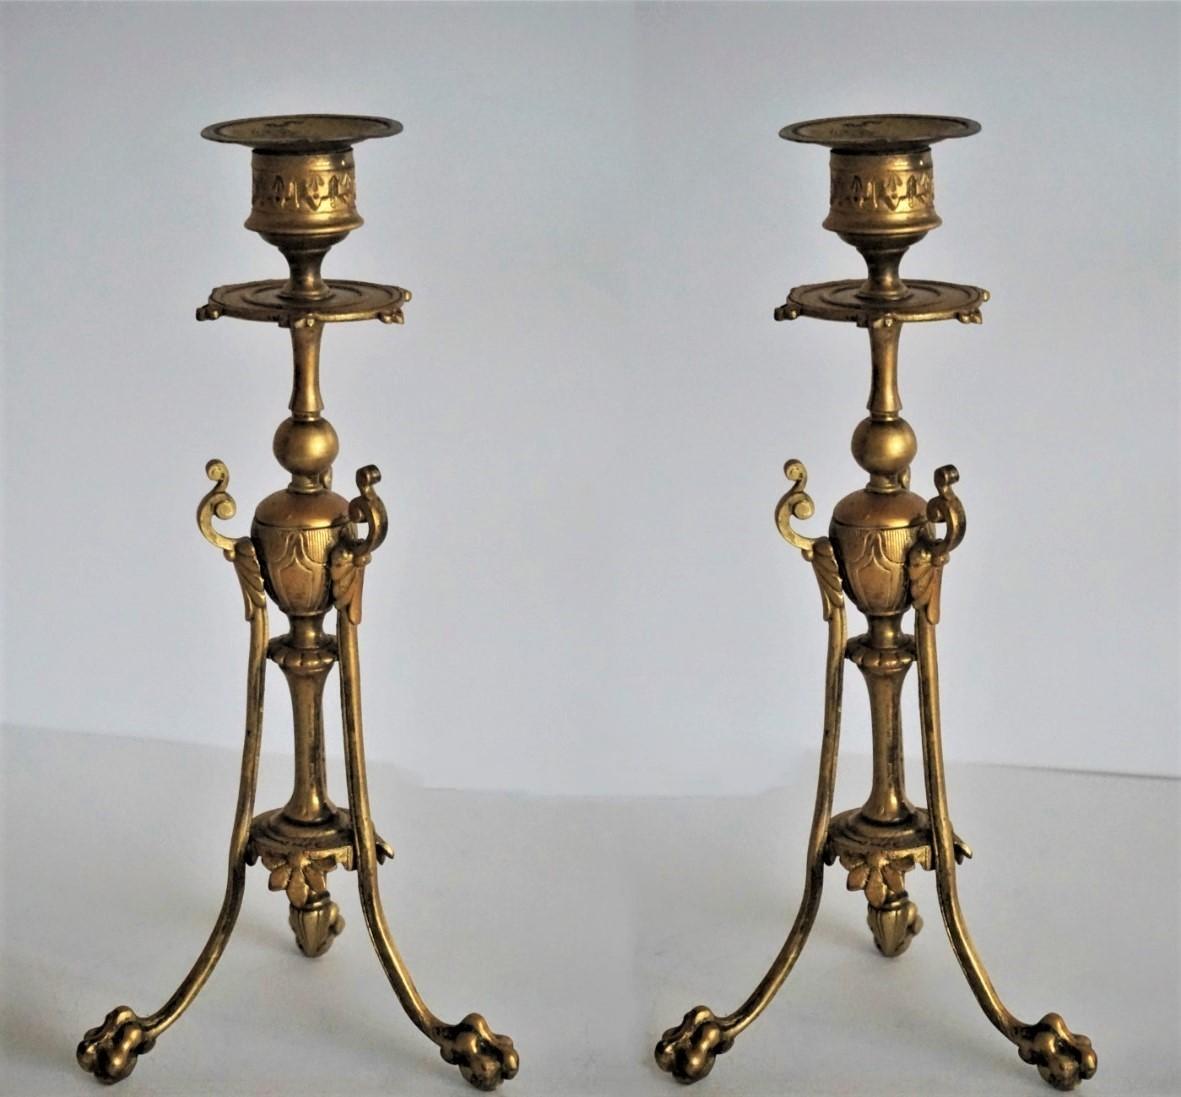 A pair of Empire style gilt bronze candlesticks raised on three lions paws, France mid-19th century.
  